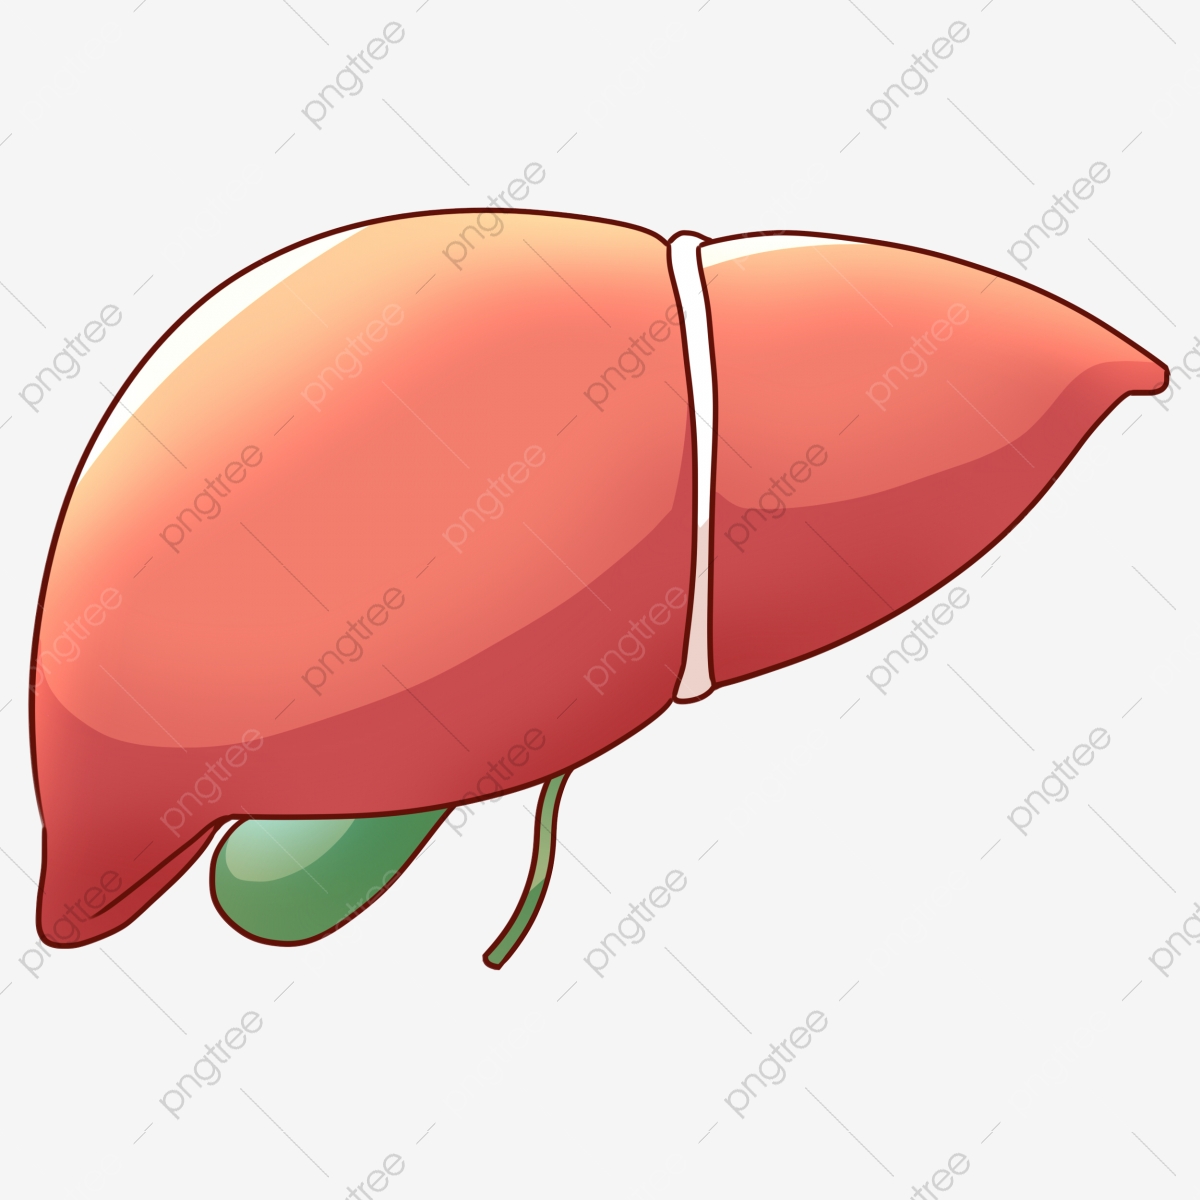 liver clipart red